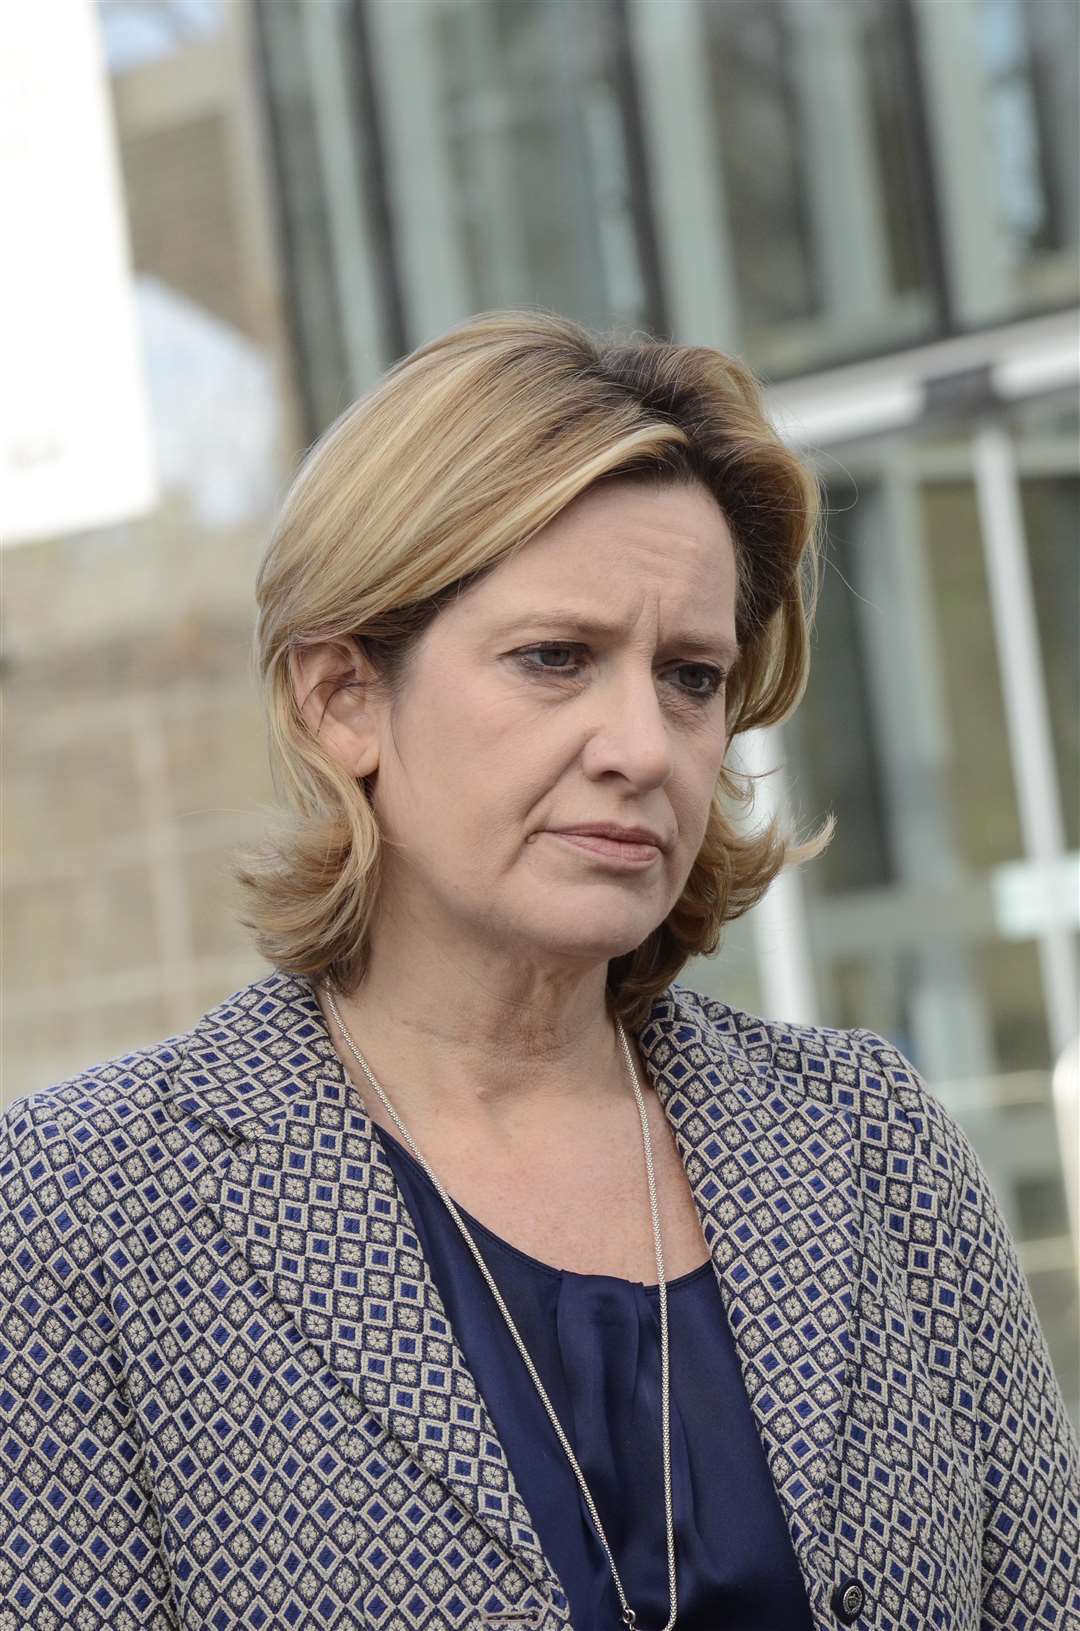 Amber Rudd: "Challenges with Universal Credit." Picture: Chris Davey